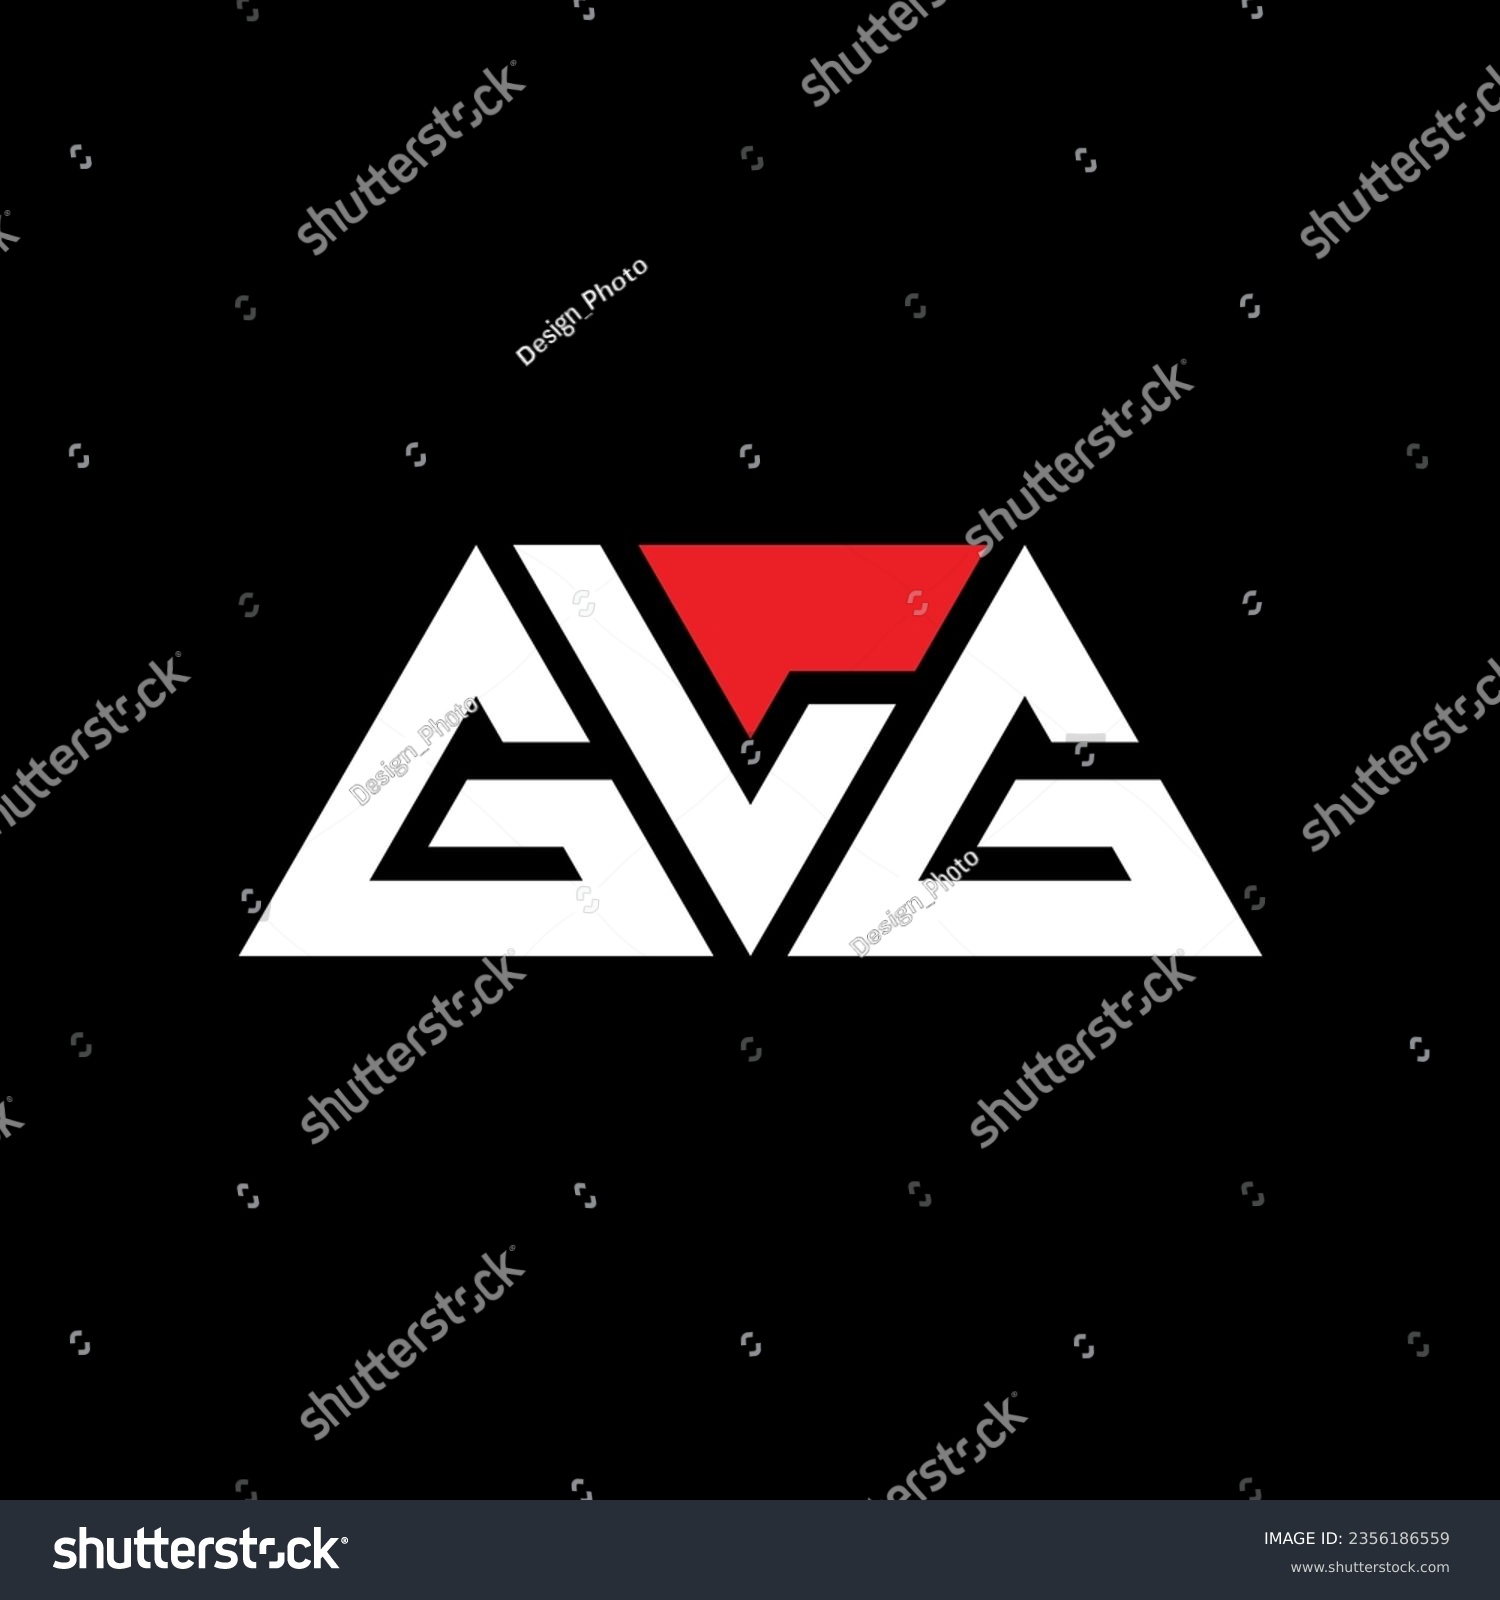 SVG of GLG triangle letter logo design with triangle shape. GLG triangle logo design monogram. GLG triangle vector logo template with red color. GLG triangular logo Simple, Elegant, and Luxurious design. svg